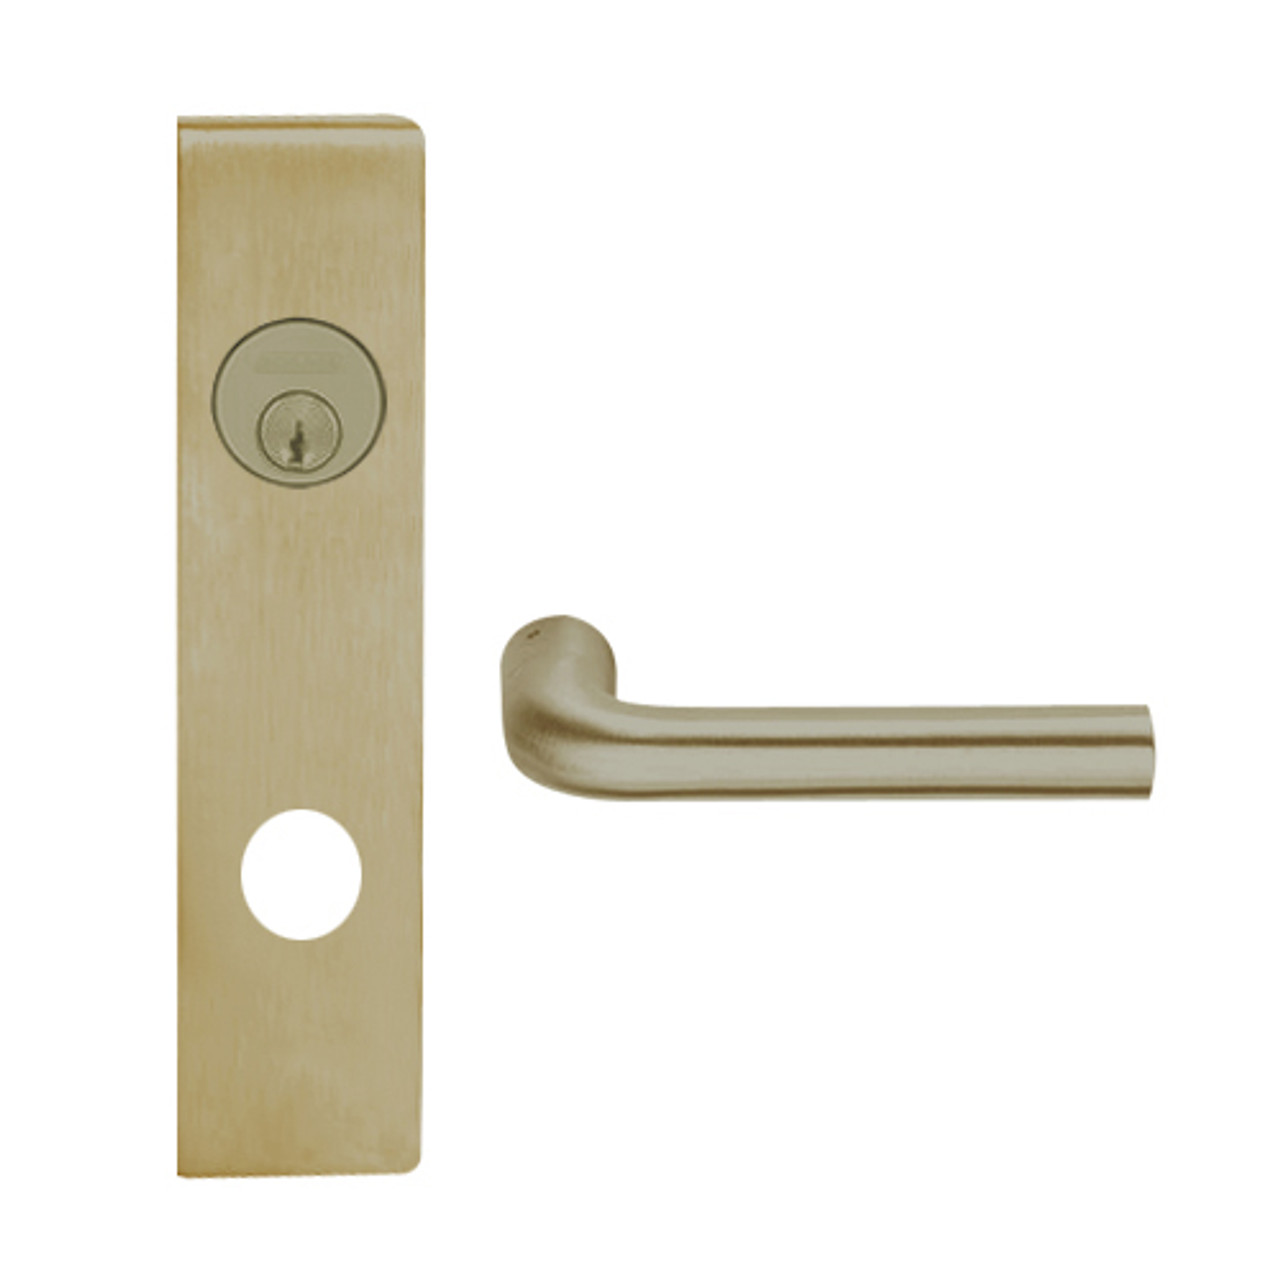 L9050L-02L-613 Schlage L Series Less Cylinder Entrance Commercial Mortise Lock with 02 Cast Lever Design in Oil Rubbed Bronze